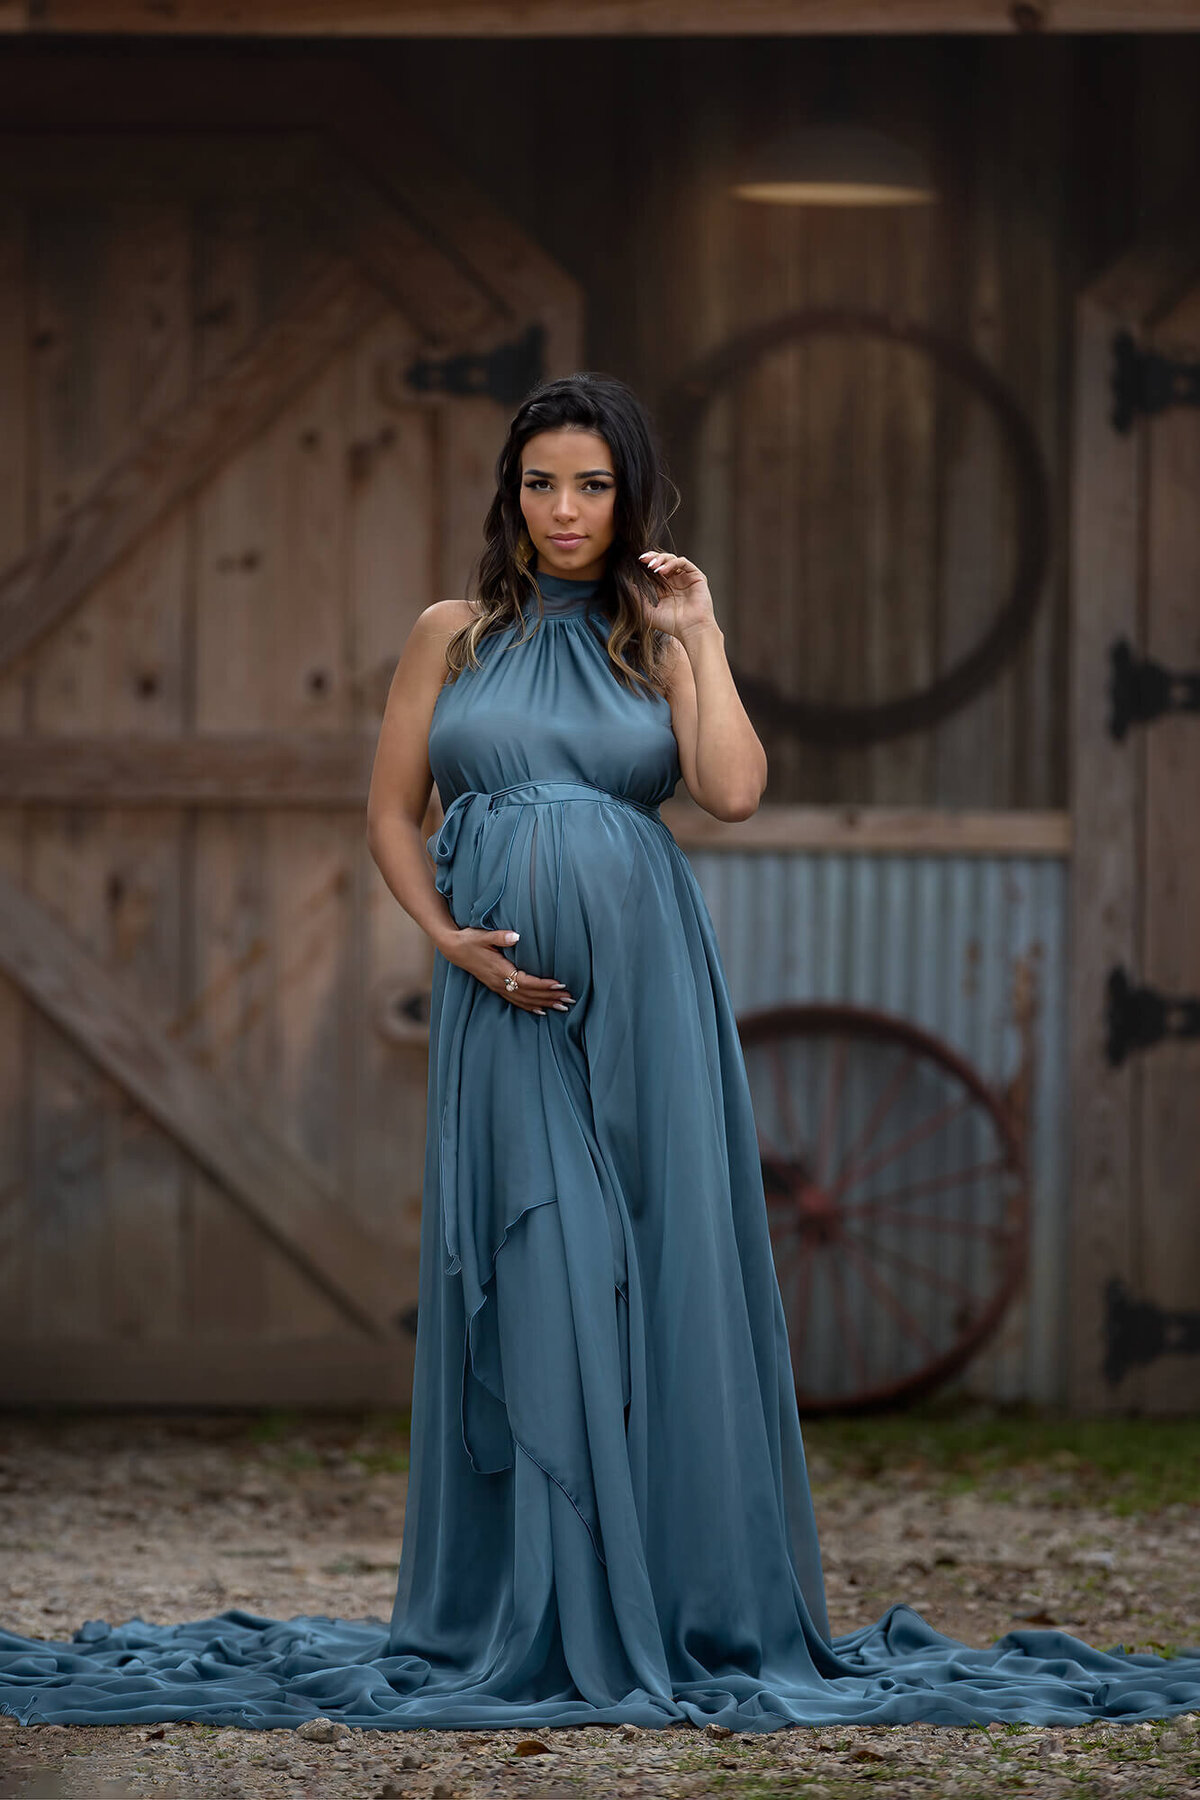 Stunning mom to be wearing a blue dress in front of a barn